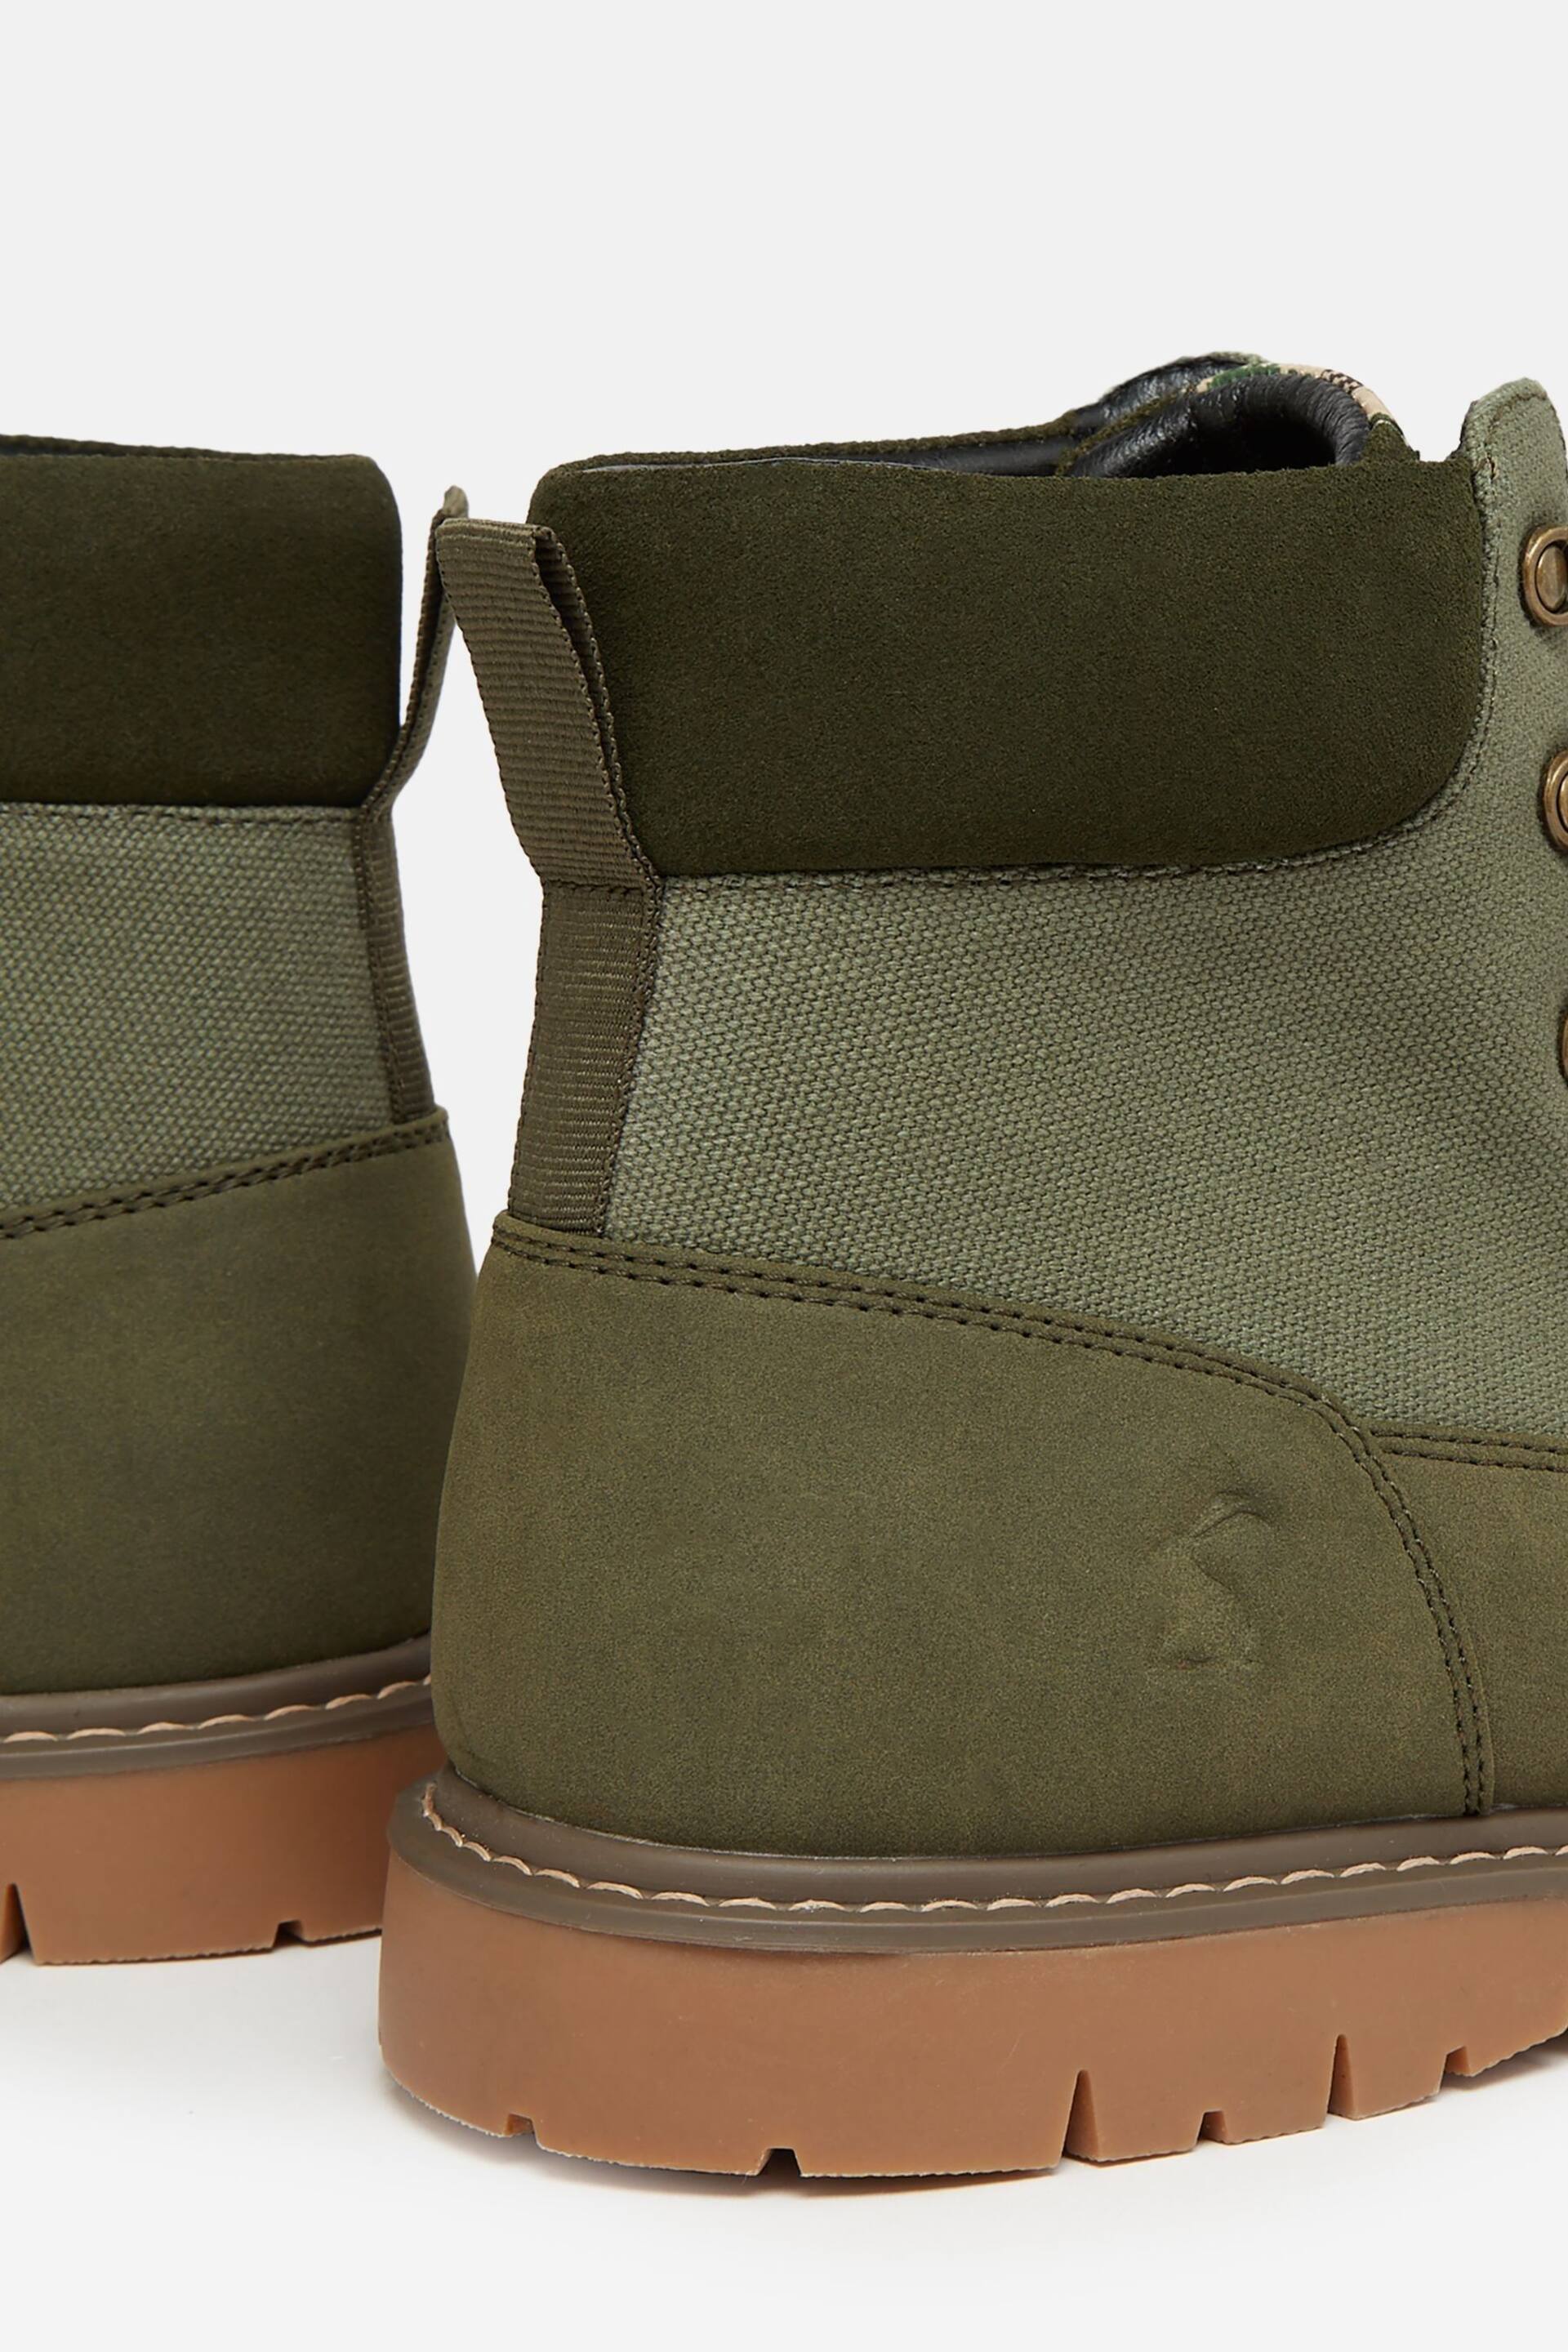 Joules Chester Khaki Green Lace Up Boots - Image 6 of 6